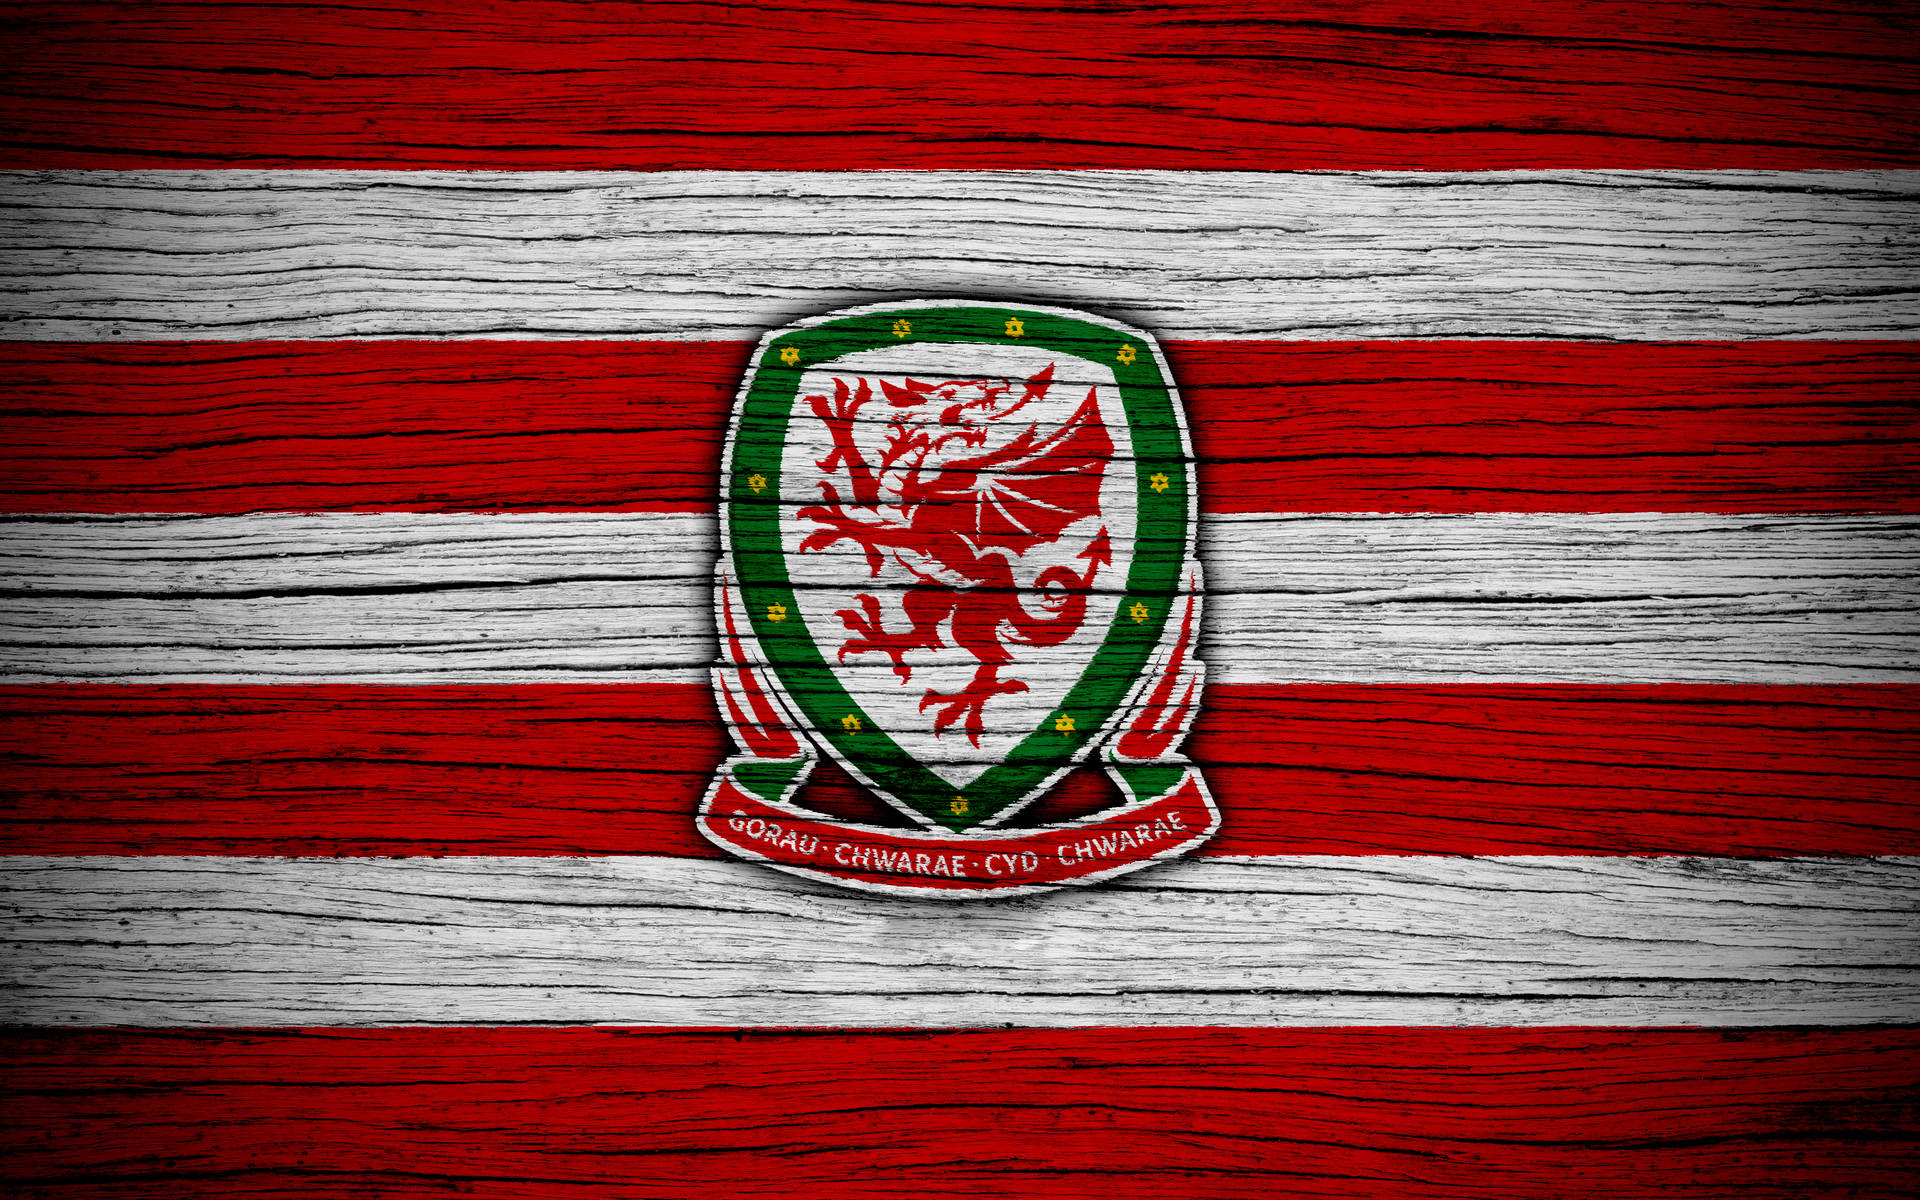 Wales National Football Team Painted On Wood Wallpaper